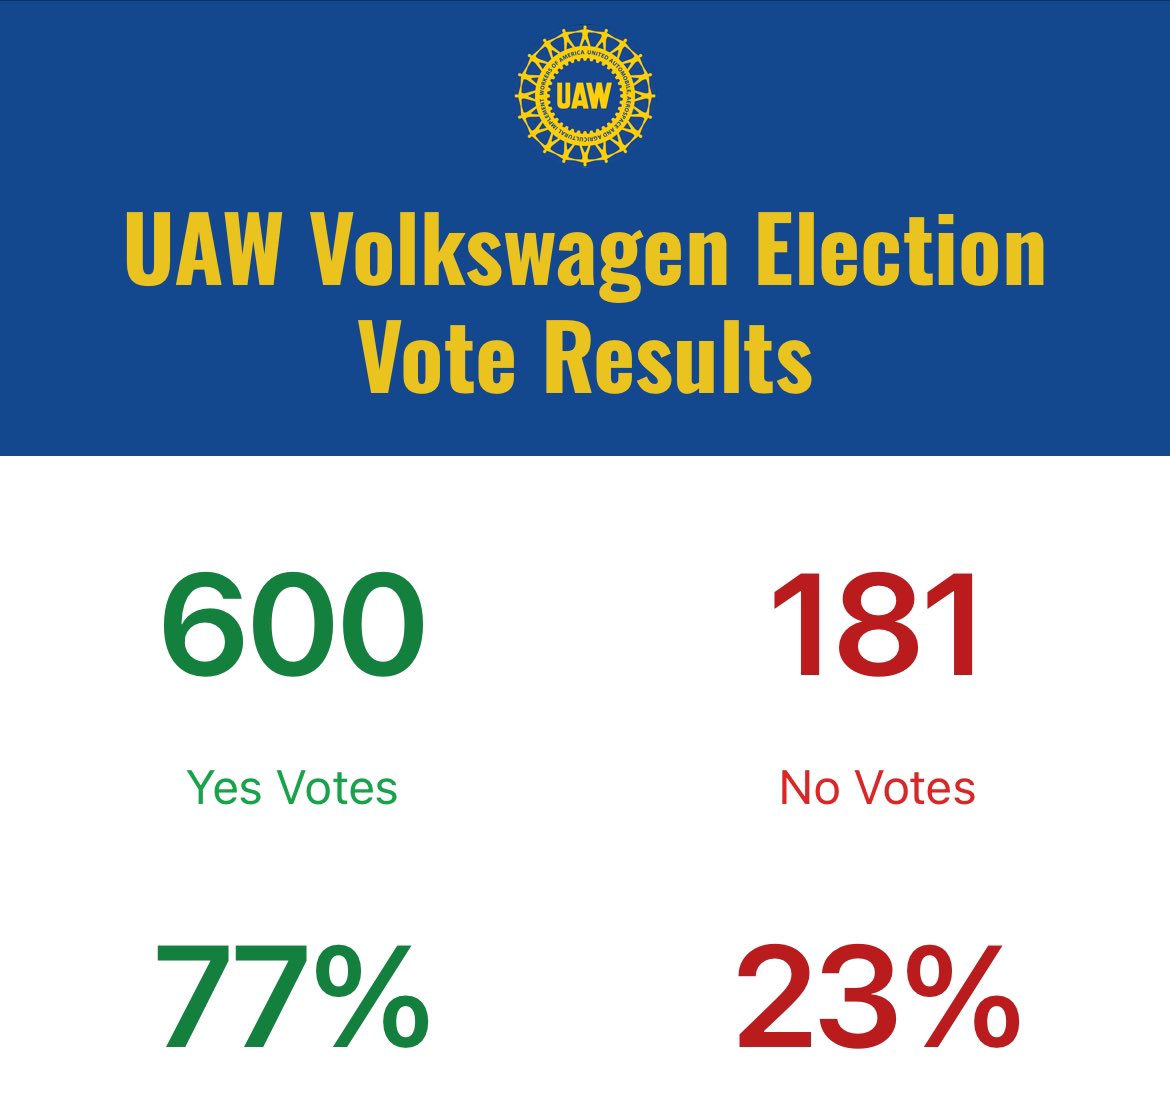 BREAKING: The union vote tally for workers at the Volkswagen plant in Tennessee is looking really good! Workers are breaking 75+% for unionizing in early tallies. There are 4,000 workers at the plant. #UnionsForAll 🤞